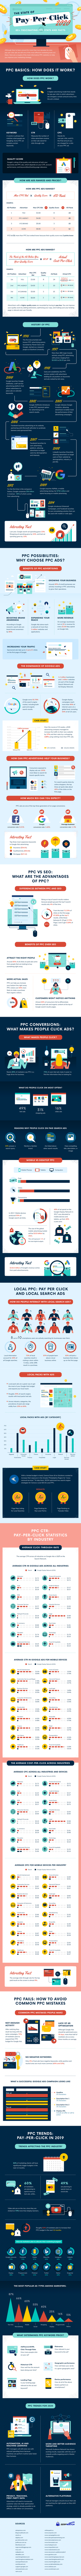 PPC Infographic Stats and Marketing Trends for 2020